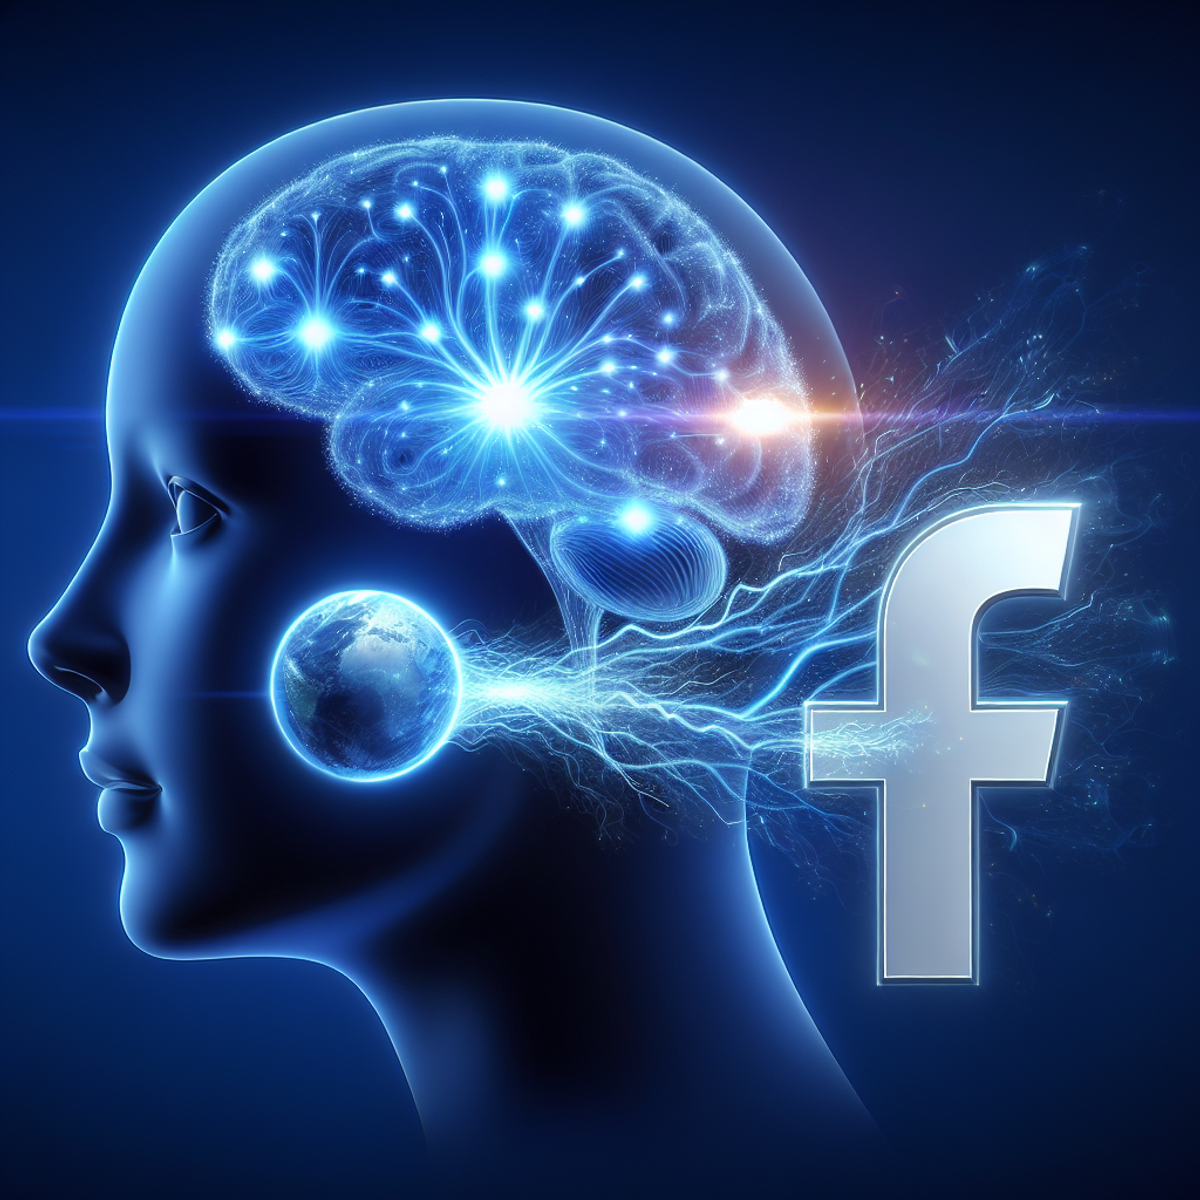 A glowing, futuristic AI brain creating content for Facebook, connected by digital energy to a simplified Facebook logo.